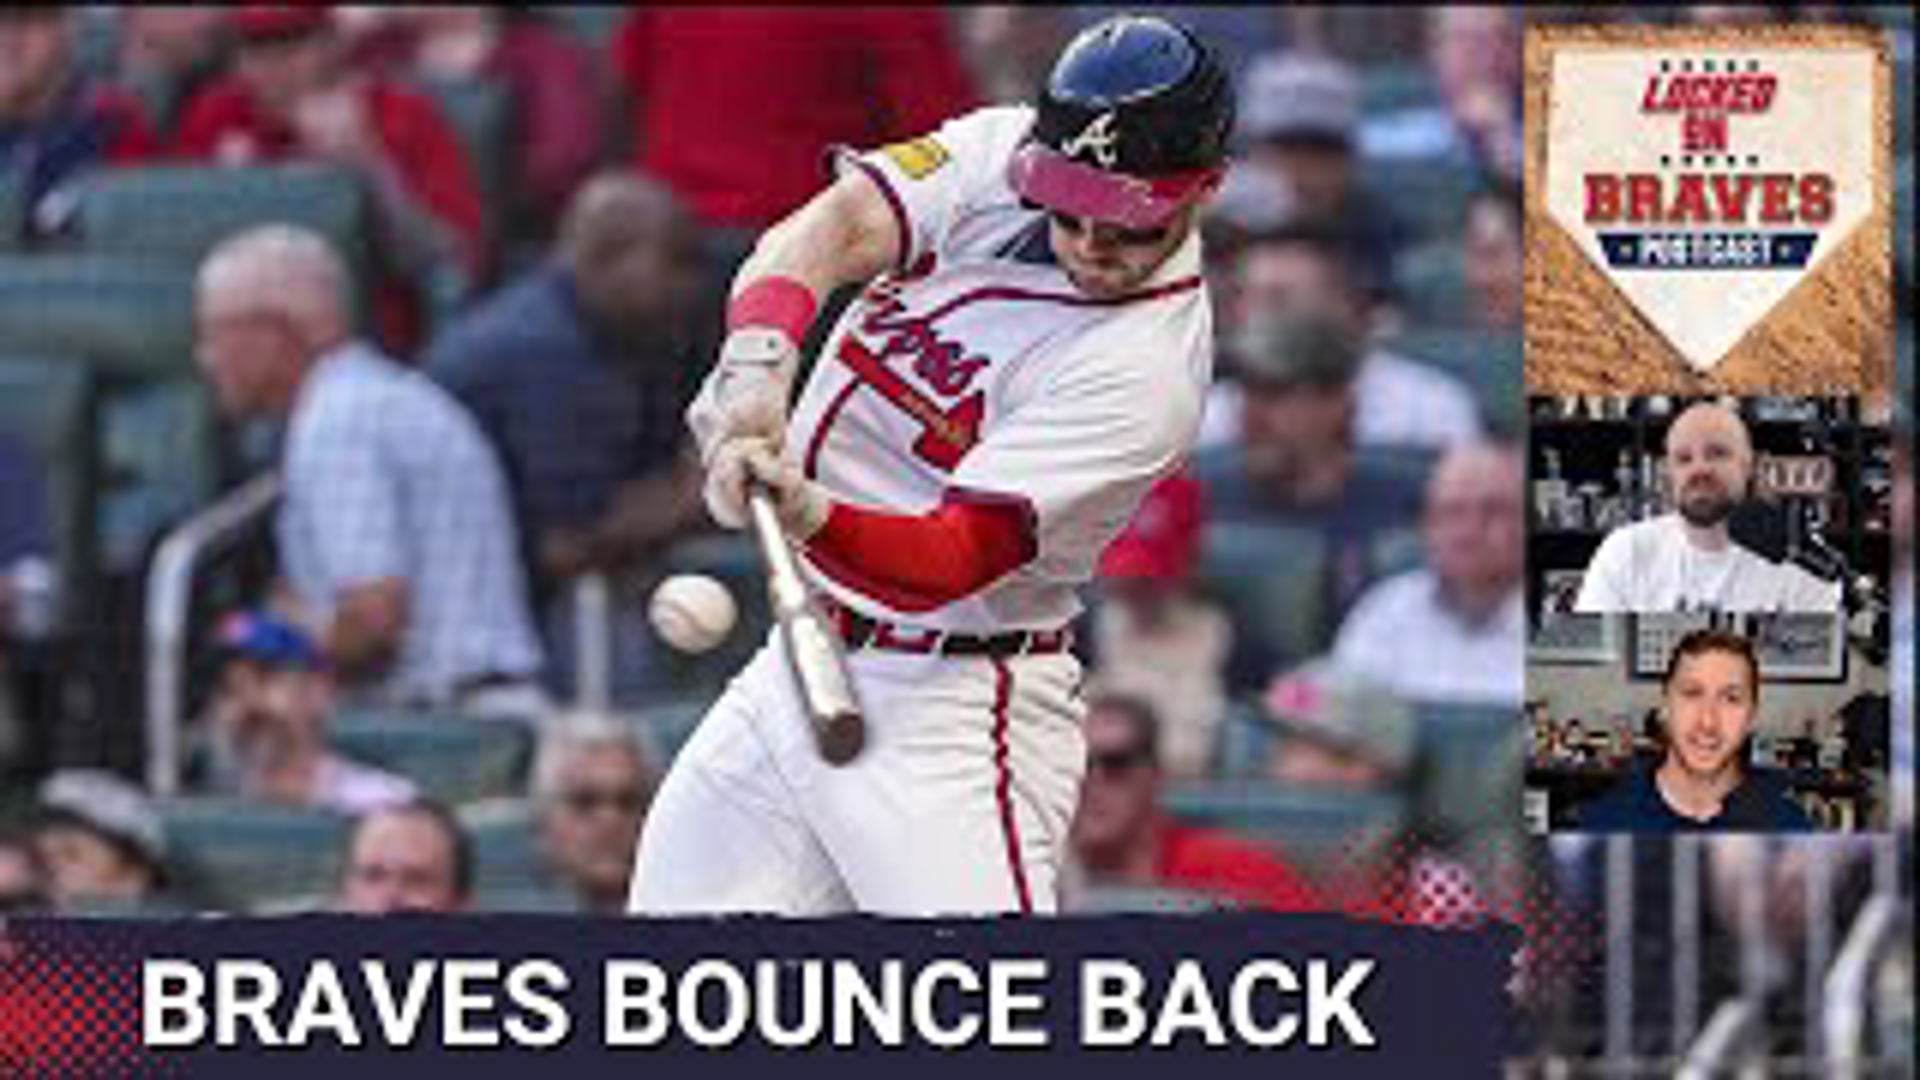 The Atlanta Braves did a little of everything to snap a three-game slide and get back in the win column with a 4-2 triumph over the Boston Red Sox on Tuesday.